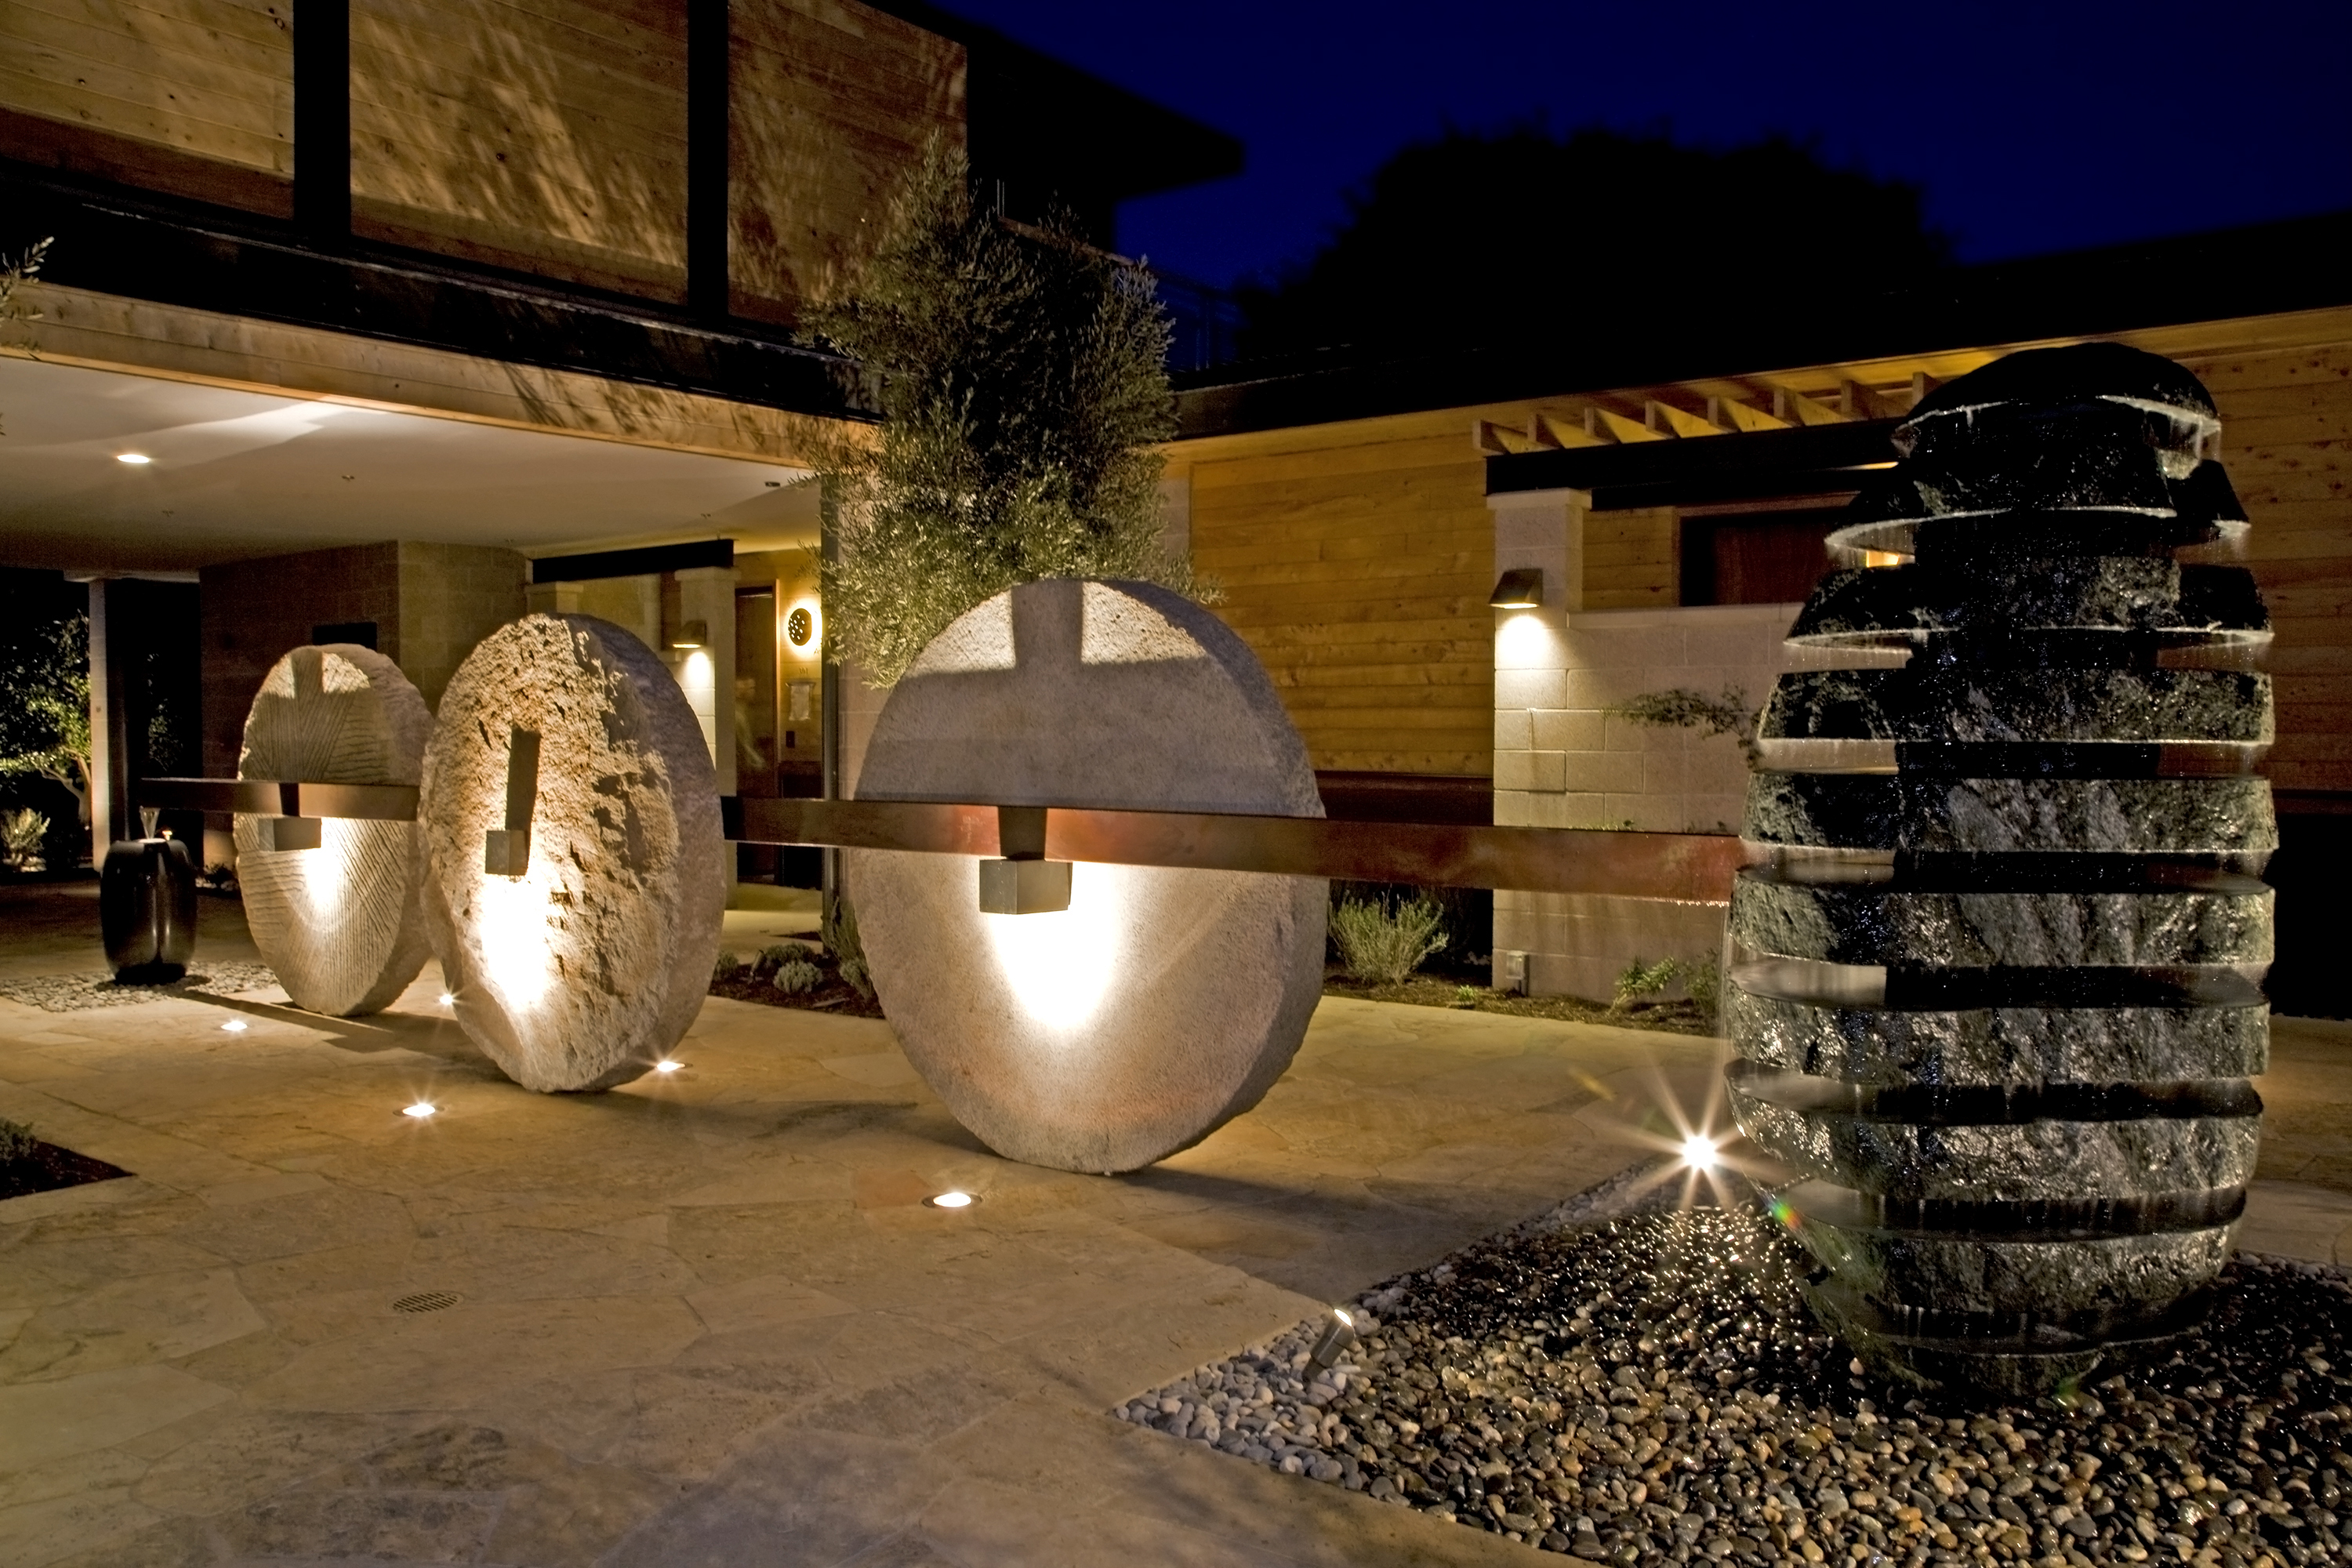 This fountain, featuring wheat grinding stones, was designed and installed in the Olive Courtyard of the Bardessono Hotel. 